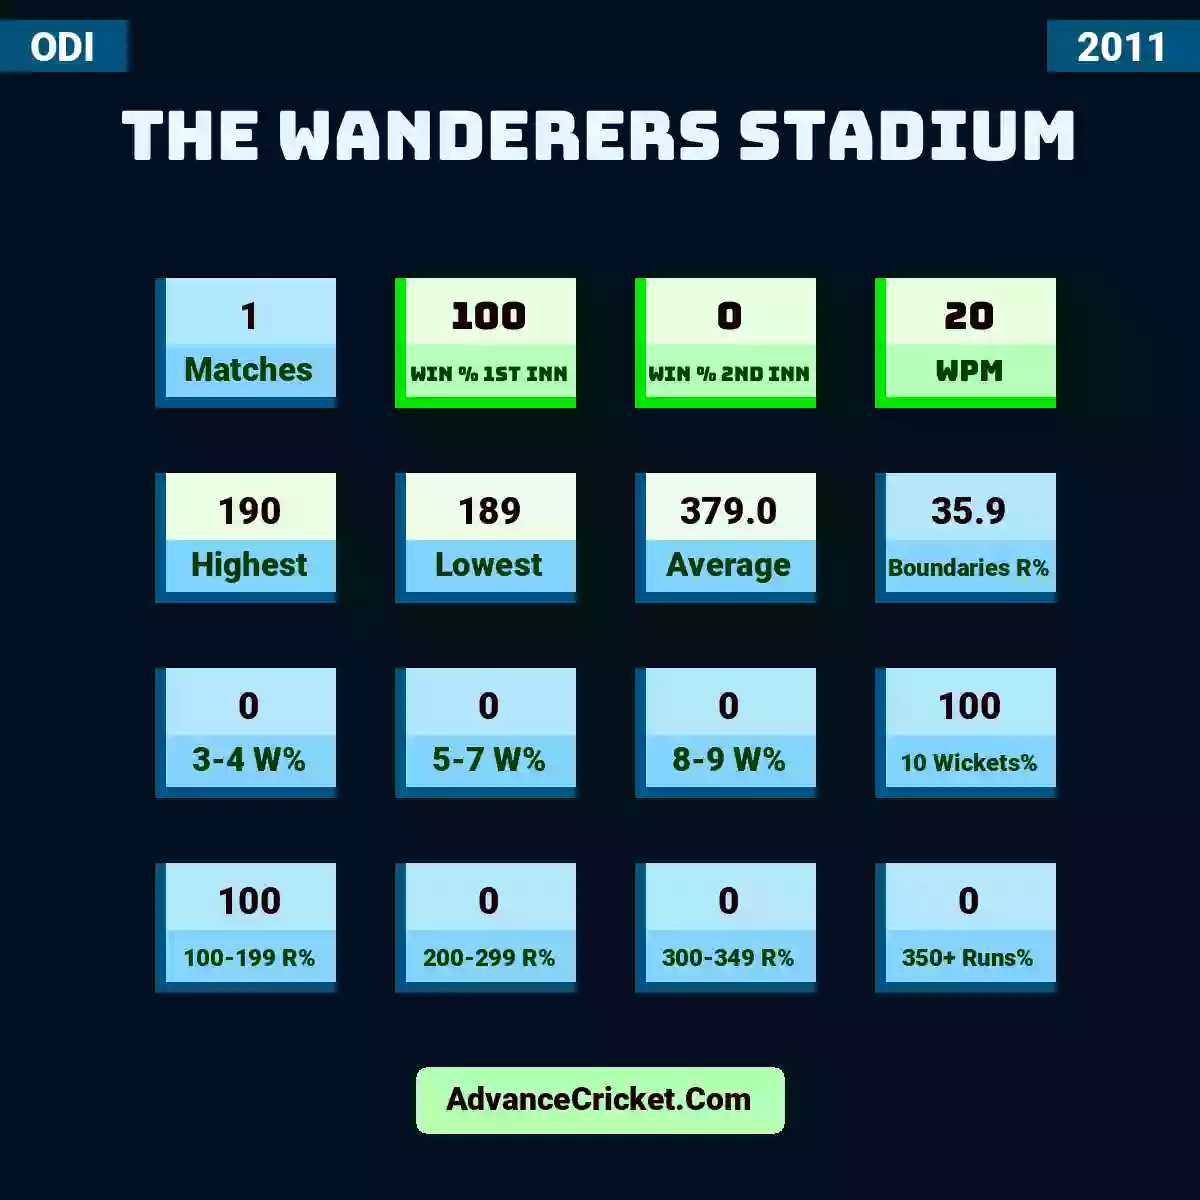 Image showing The Wanderers Stadium with Matches: 1, Win % 1st Inn: 100, Win % 2nd Inn: 0, WPM: 20, Highest: 190, Lowest: 189, Average: 379.0, Boundaries R%: 35.9, 3-4 W%: 0, 5-7 W%: 0, 8-9 W%: 0, 10 Wickets%: 100, 100-199 R%: 100, 200-299 R%: 0, 300-349 R%: 0, 350+ Runs%: 0.